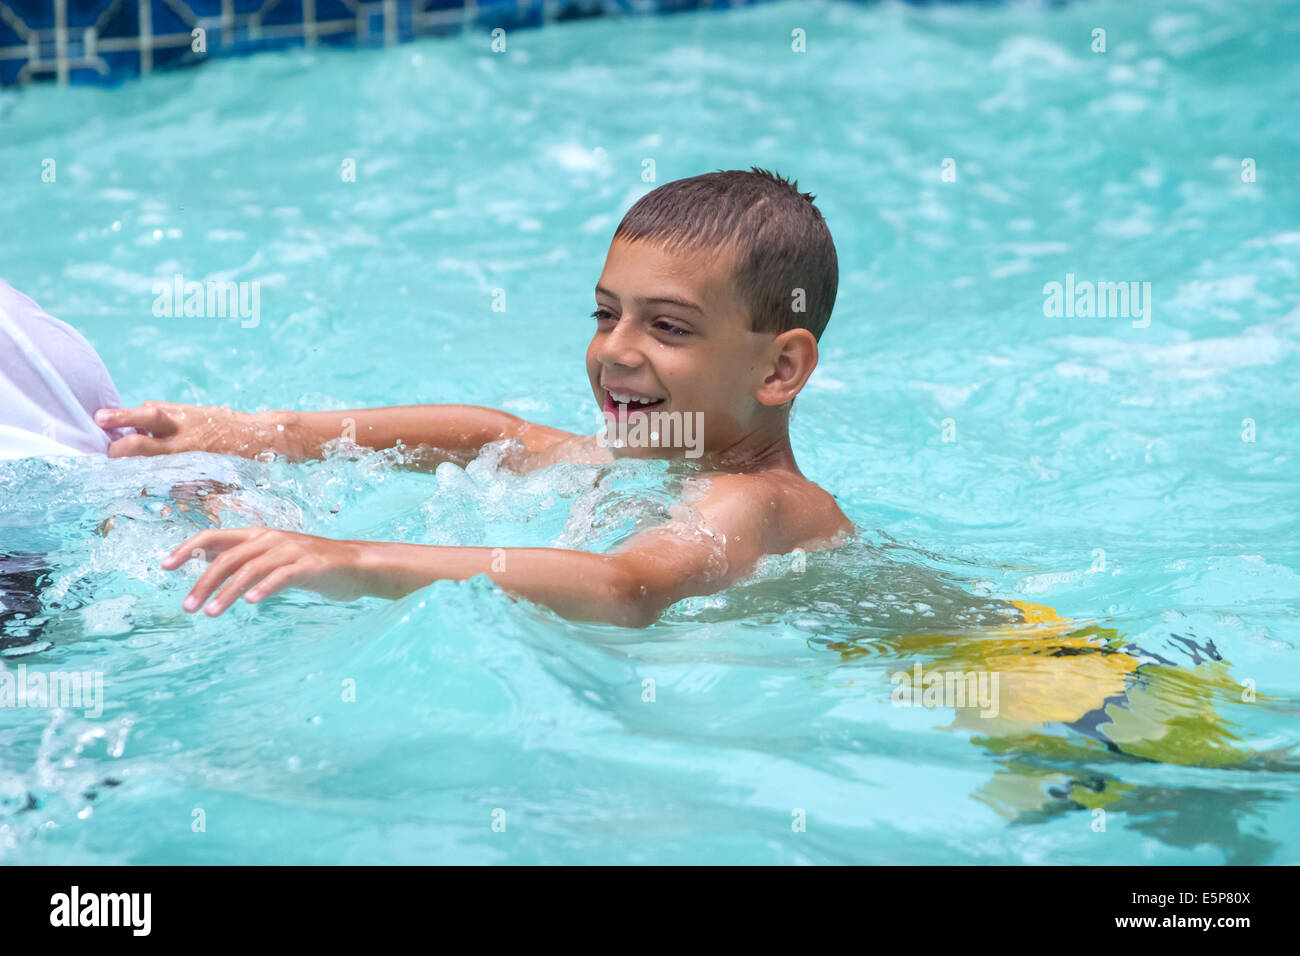 Young boy swimming and playing in a swimming pool Stock Photo